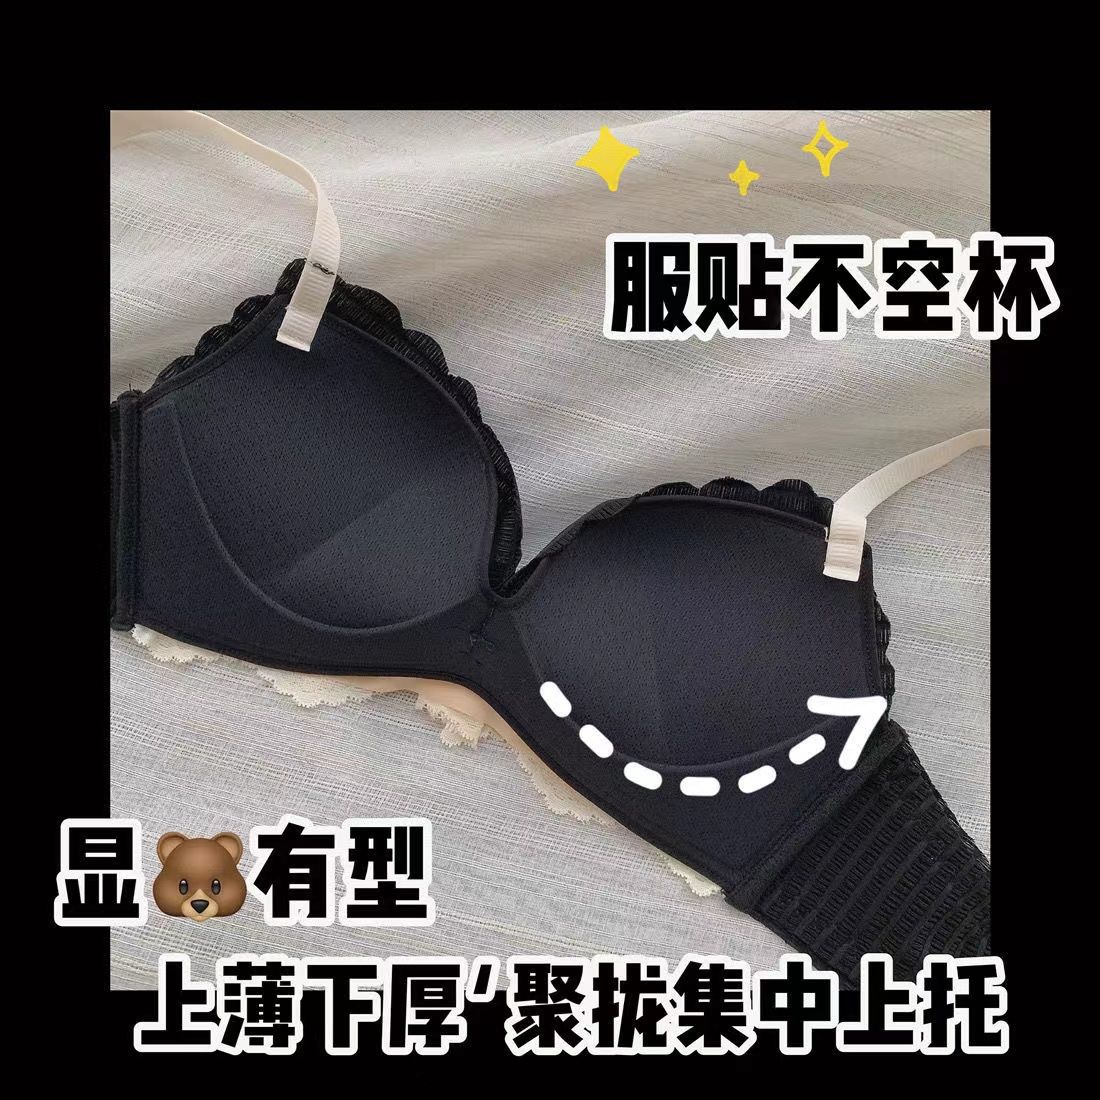 Underwear women's pure desire style Japanese girl small chest gathered anti-sagging adjustable bra without steel ring sexy thin bra